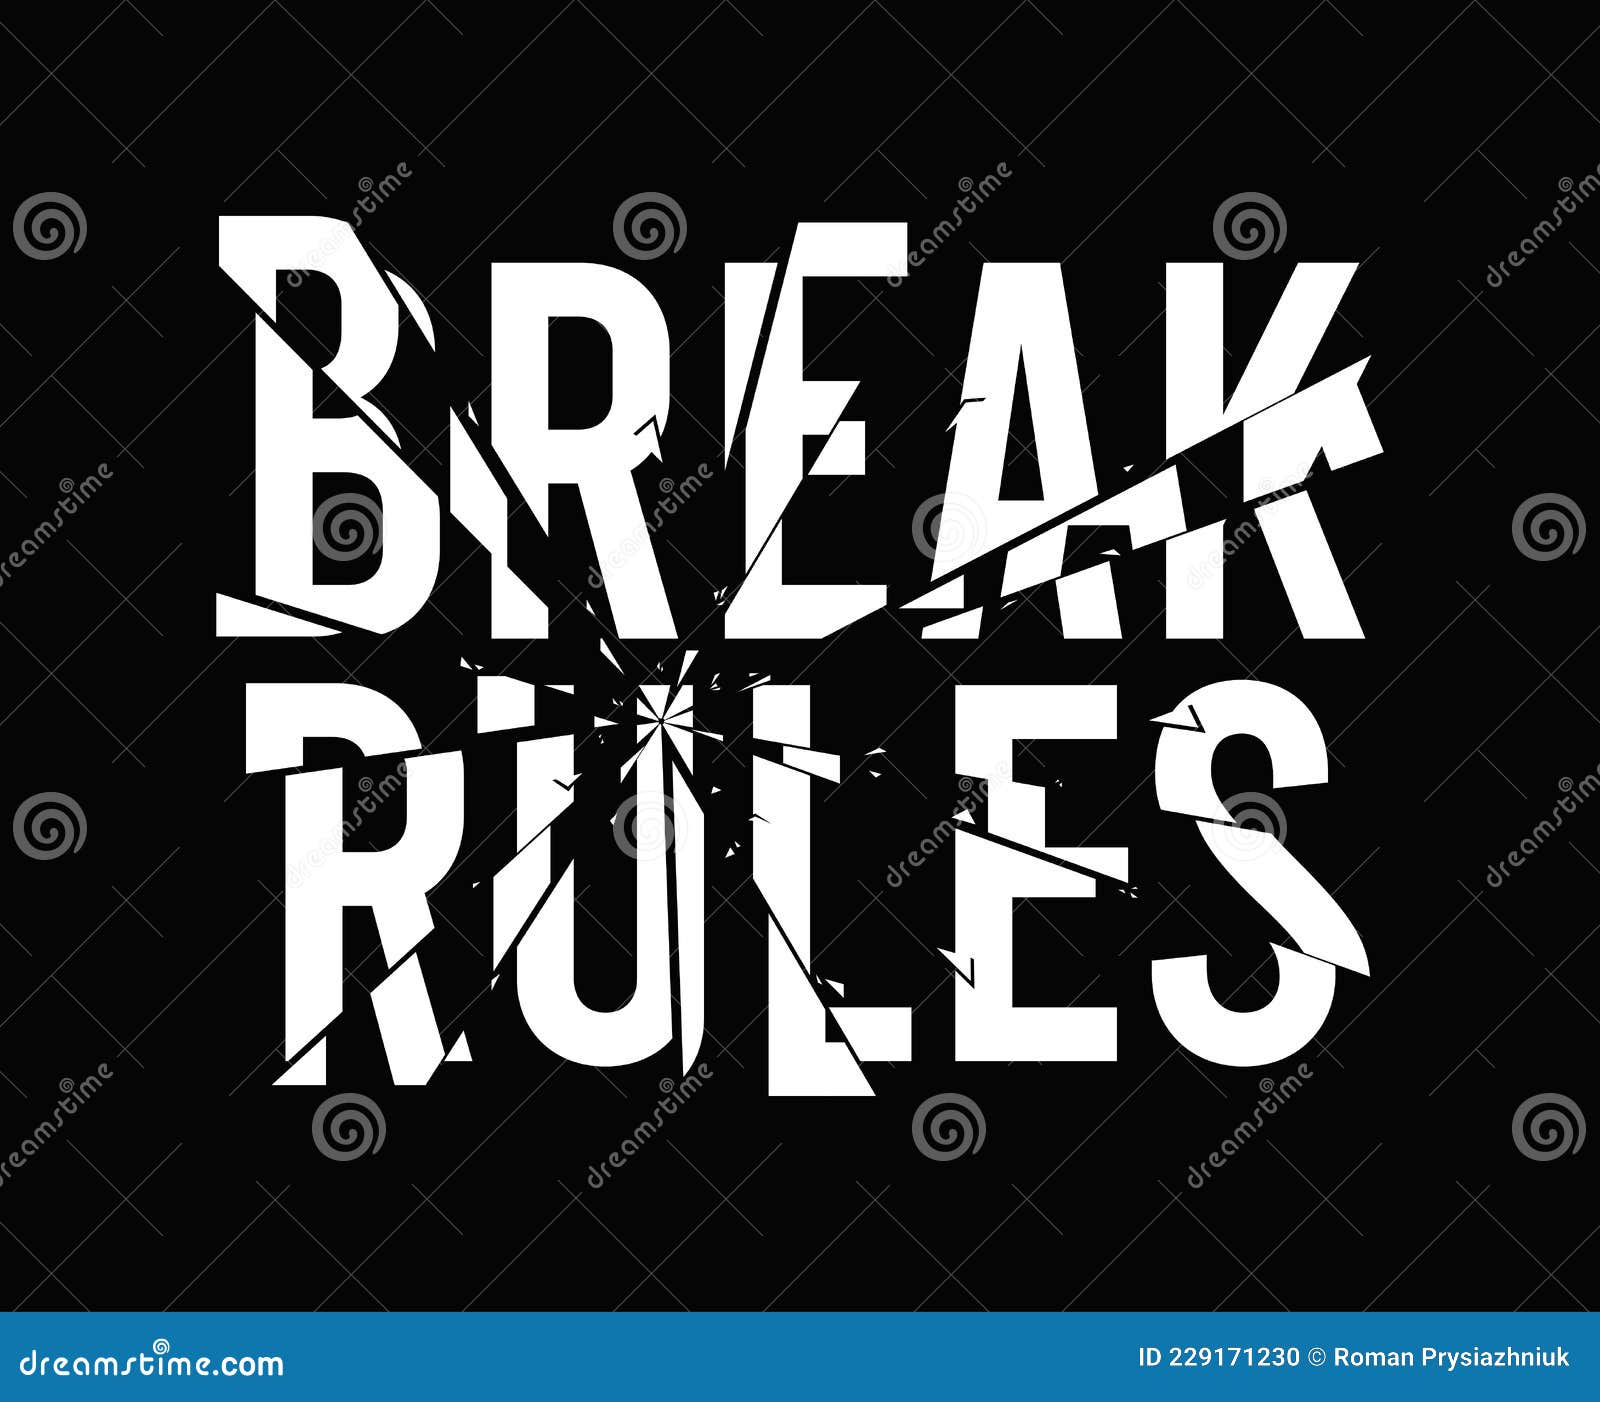 break rules - slogan for t-shirt  with broken glass effect. typography graphics for tee shirt, apparel print 